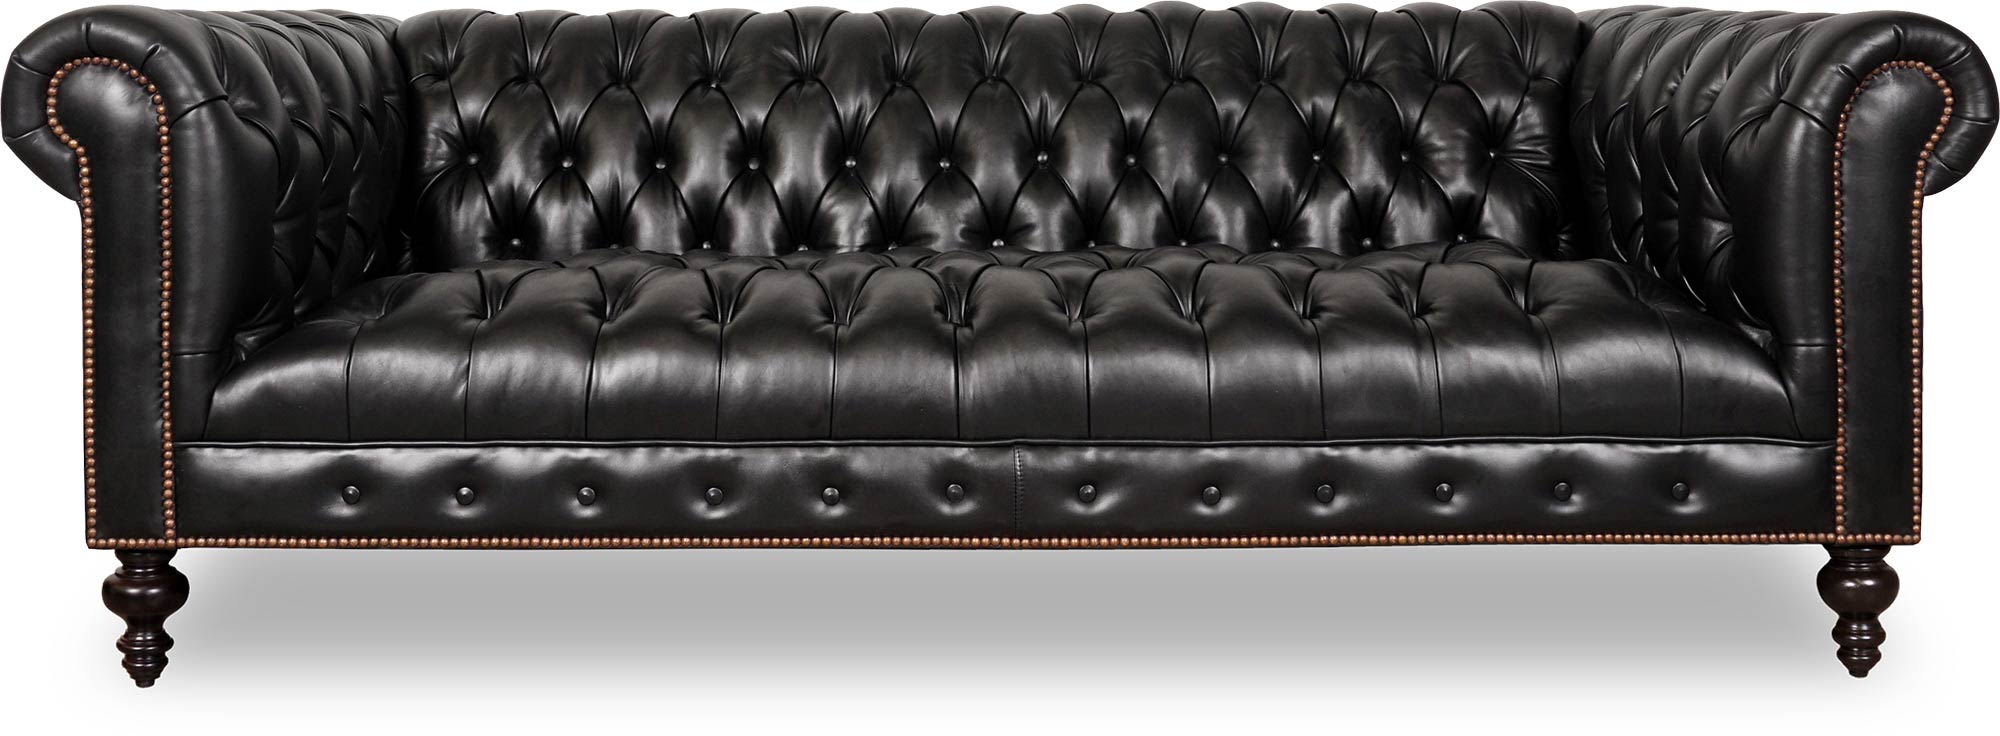 black leather chesterfield sectional sofa